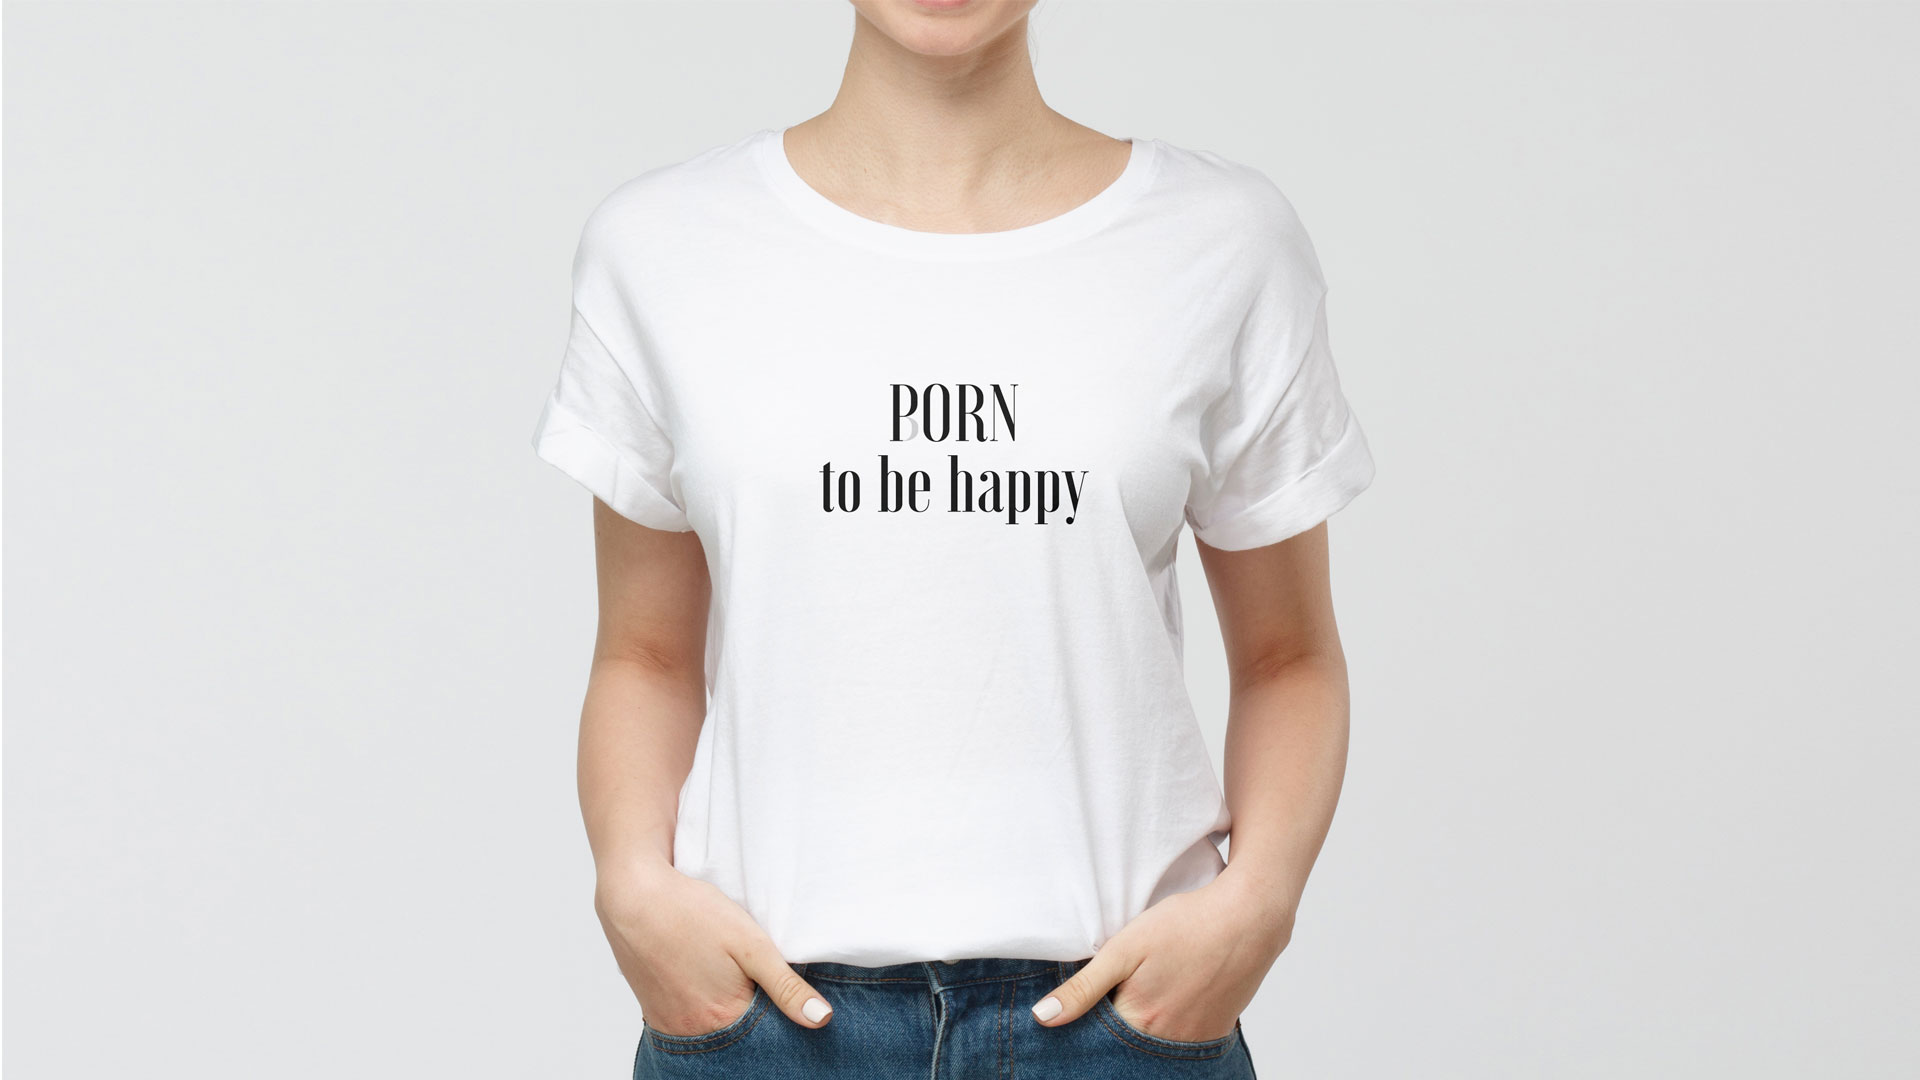 Porn to be happy